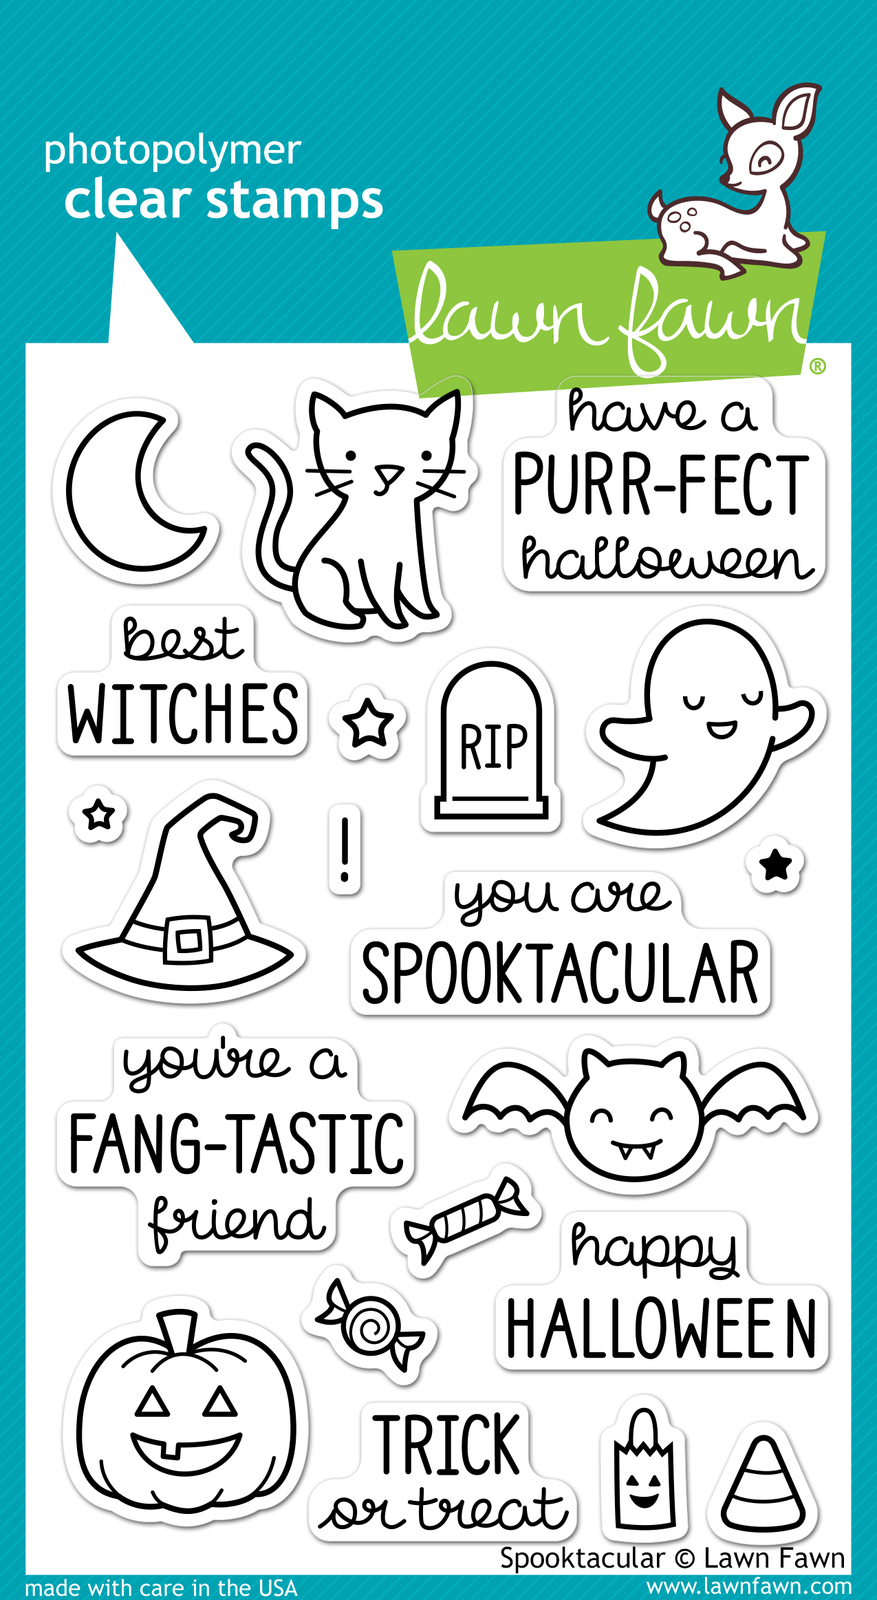 Lawn Fawn Stamps Spooktacular LF698 